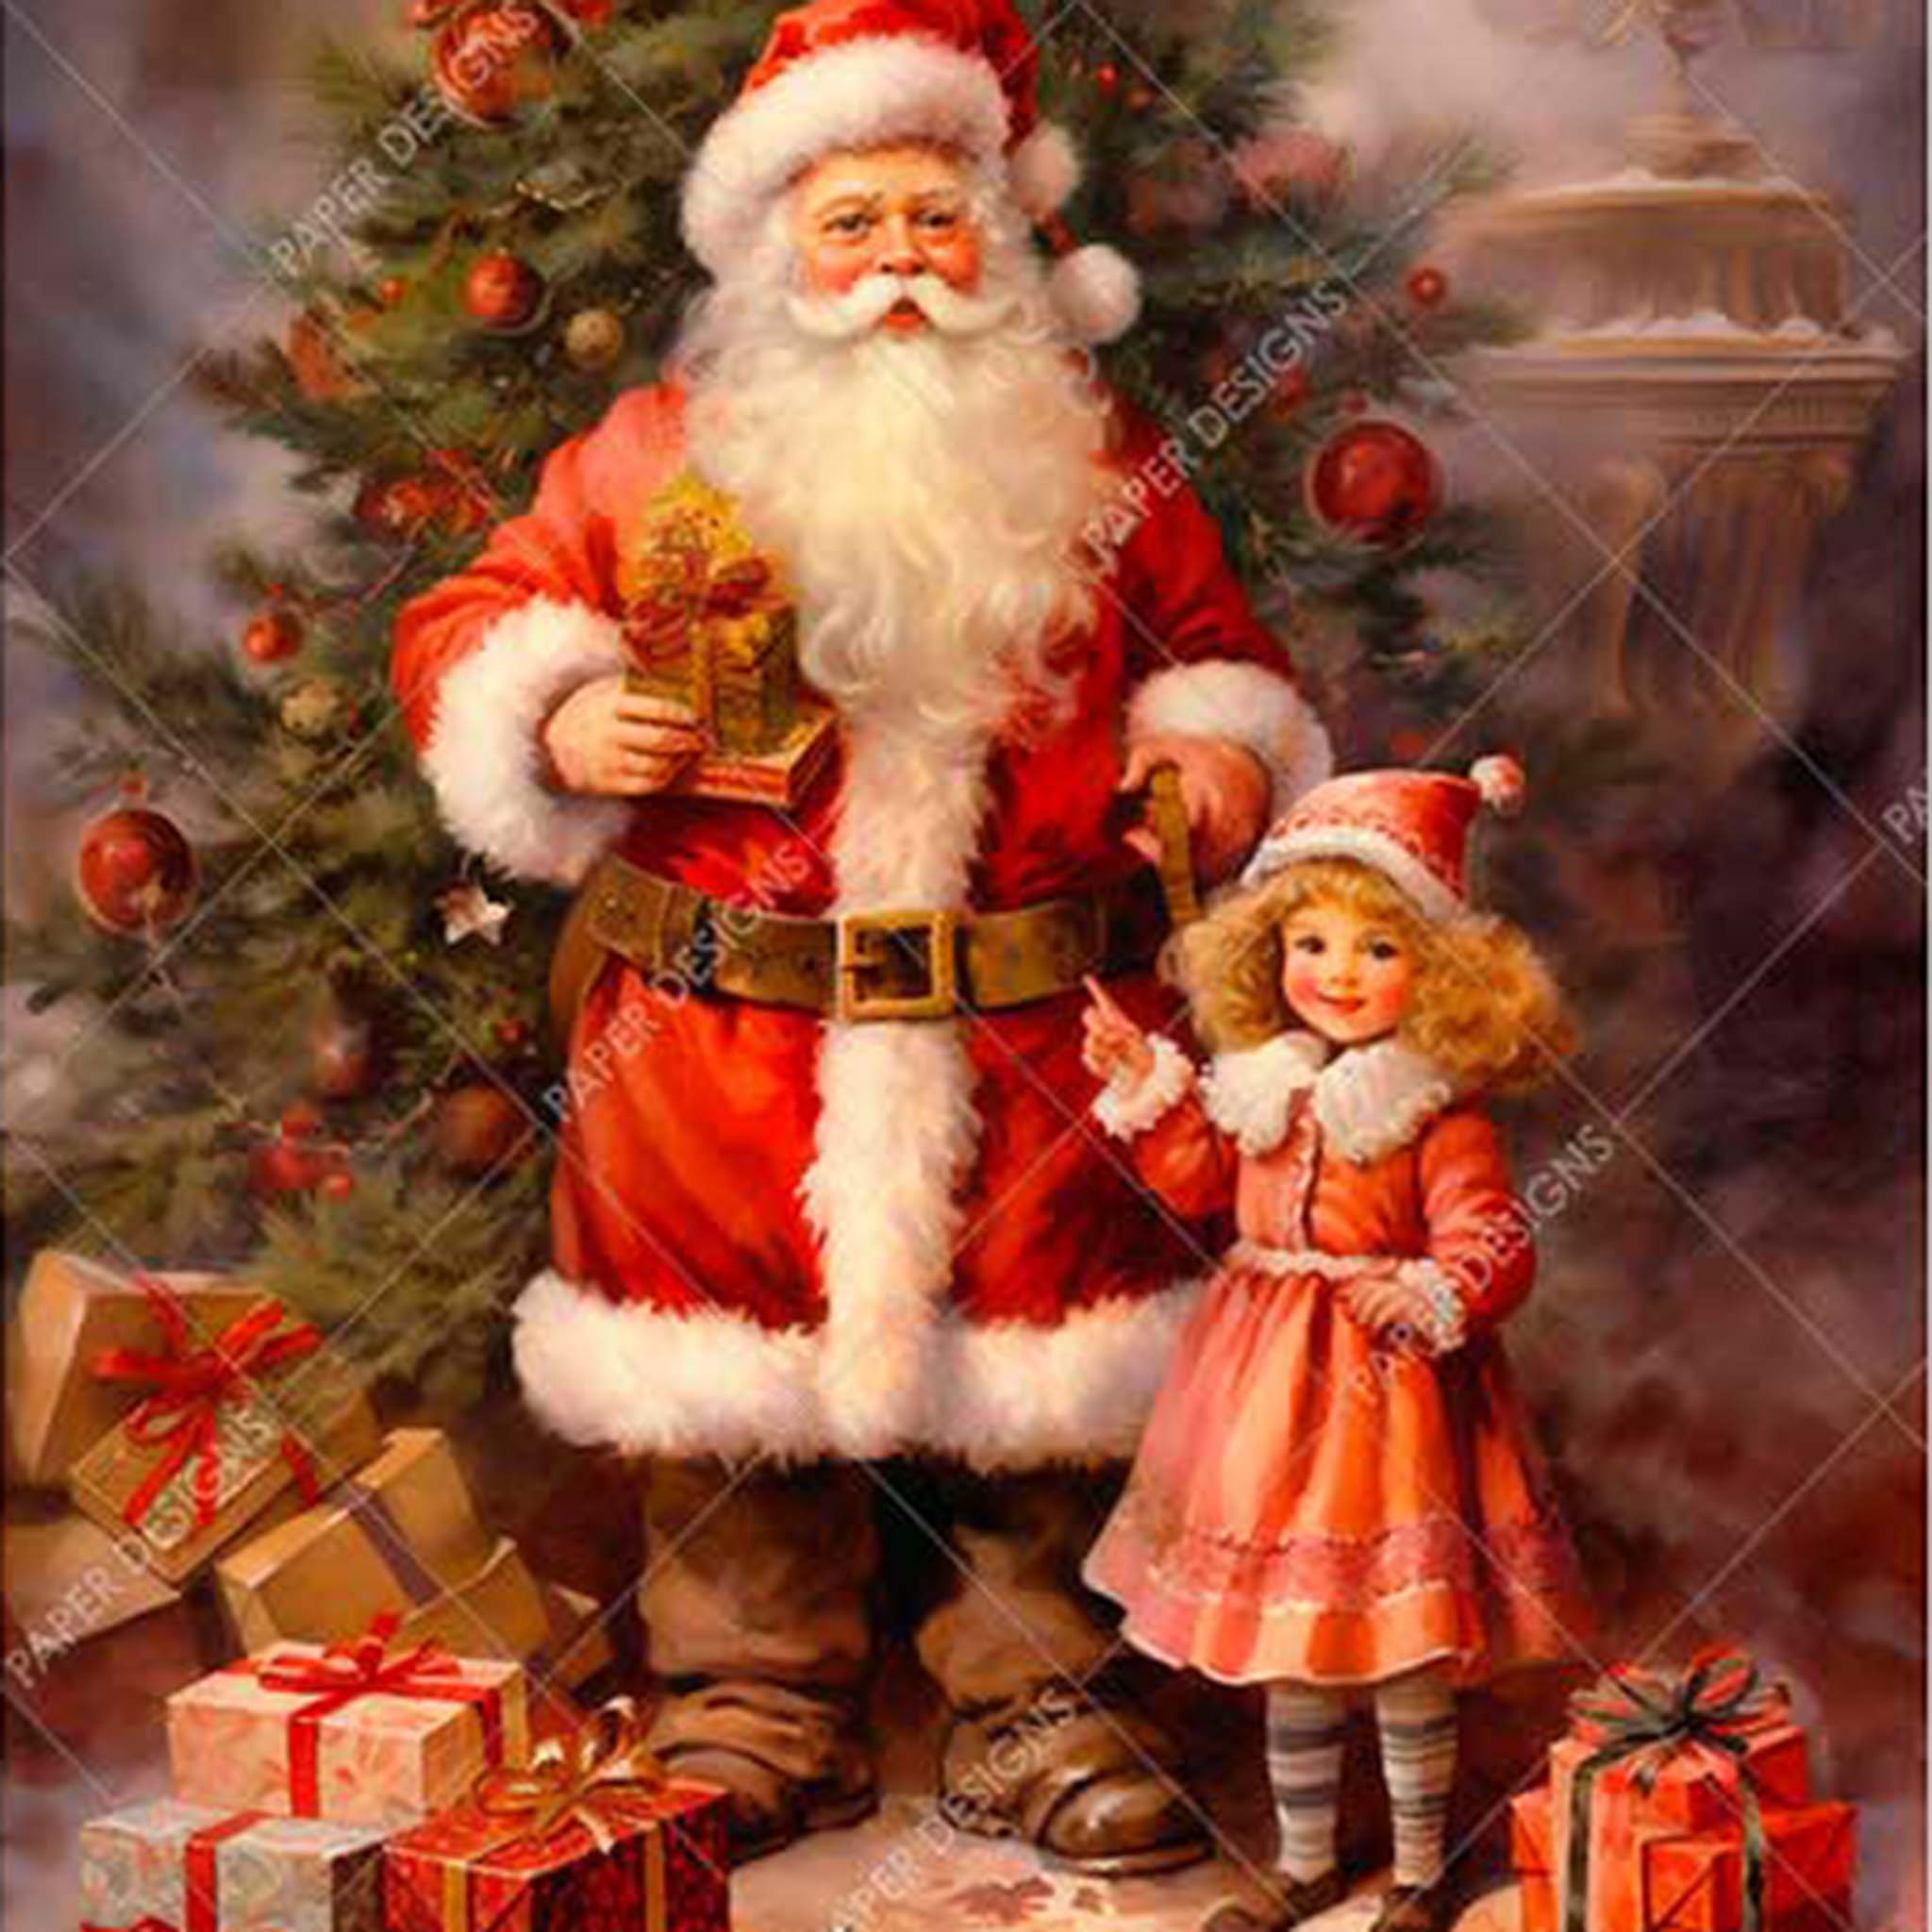 A3 rice paper design featuring a Victorian Santa with an adorable little girl in front of a festive Christmas tree. 